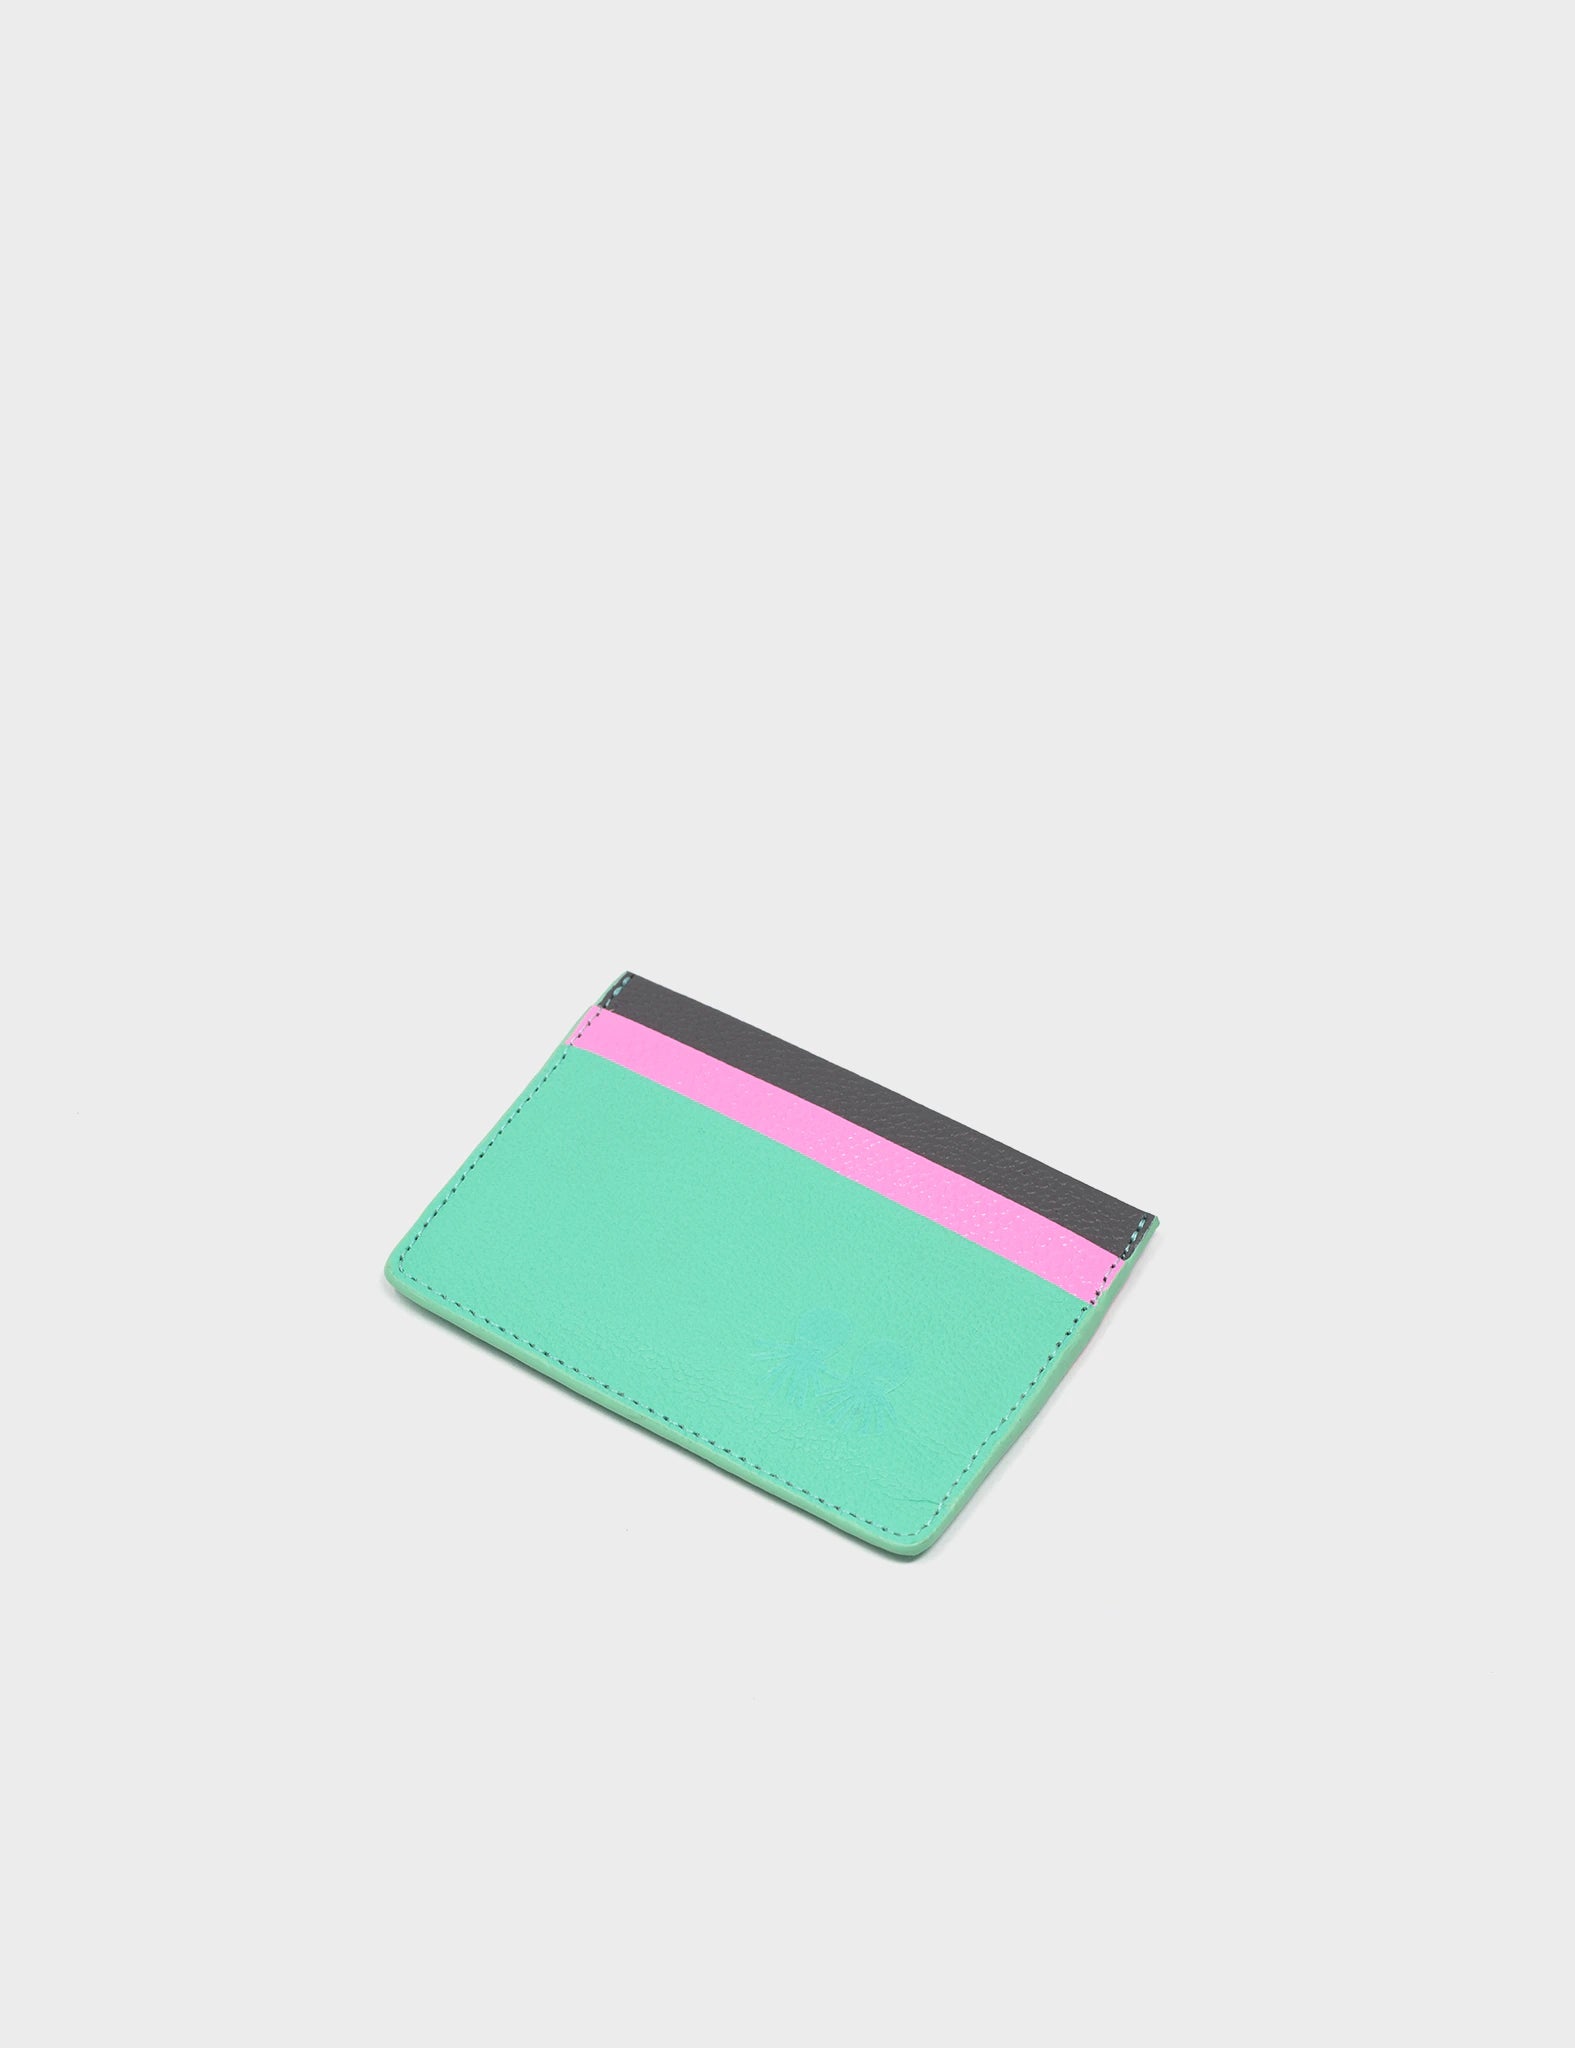 Filium Cardholder - Biscay green Print- Front corner angle view